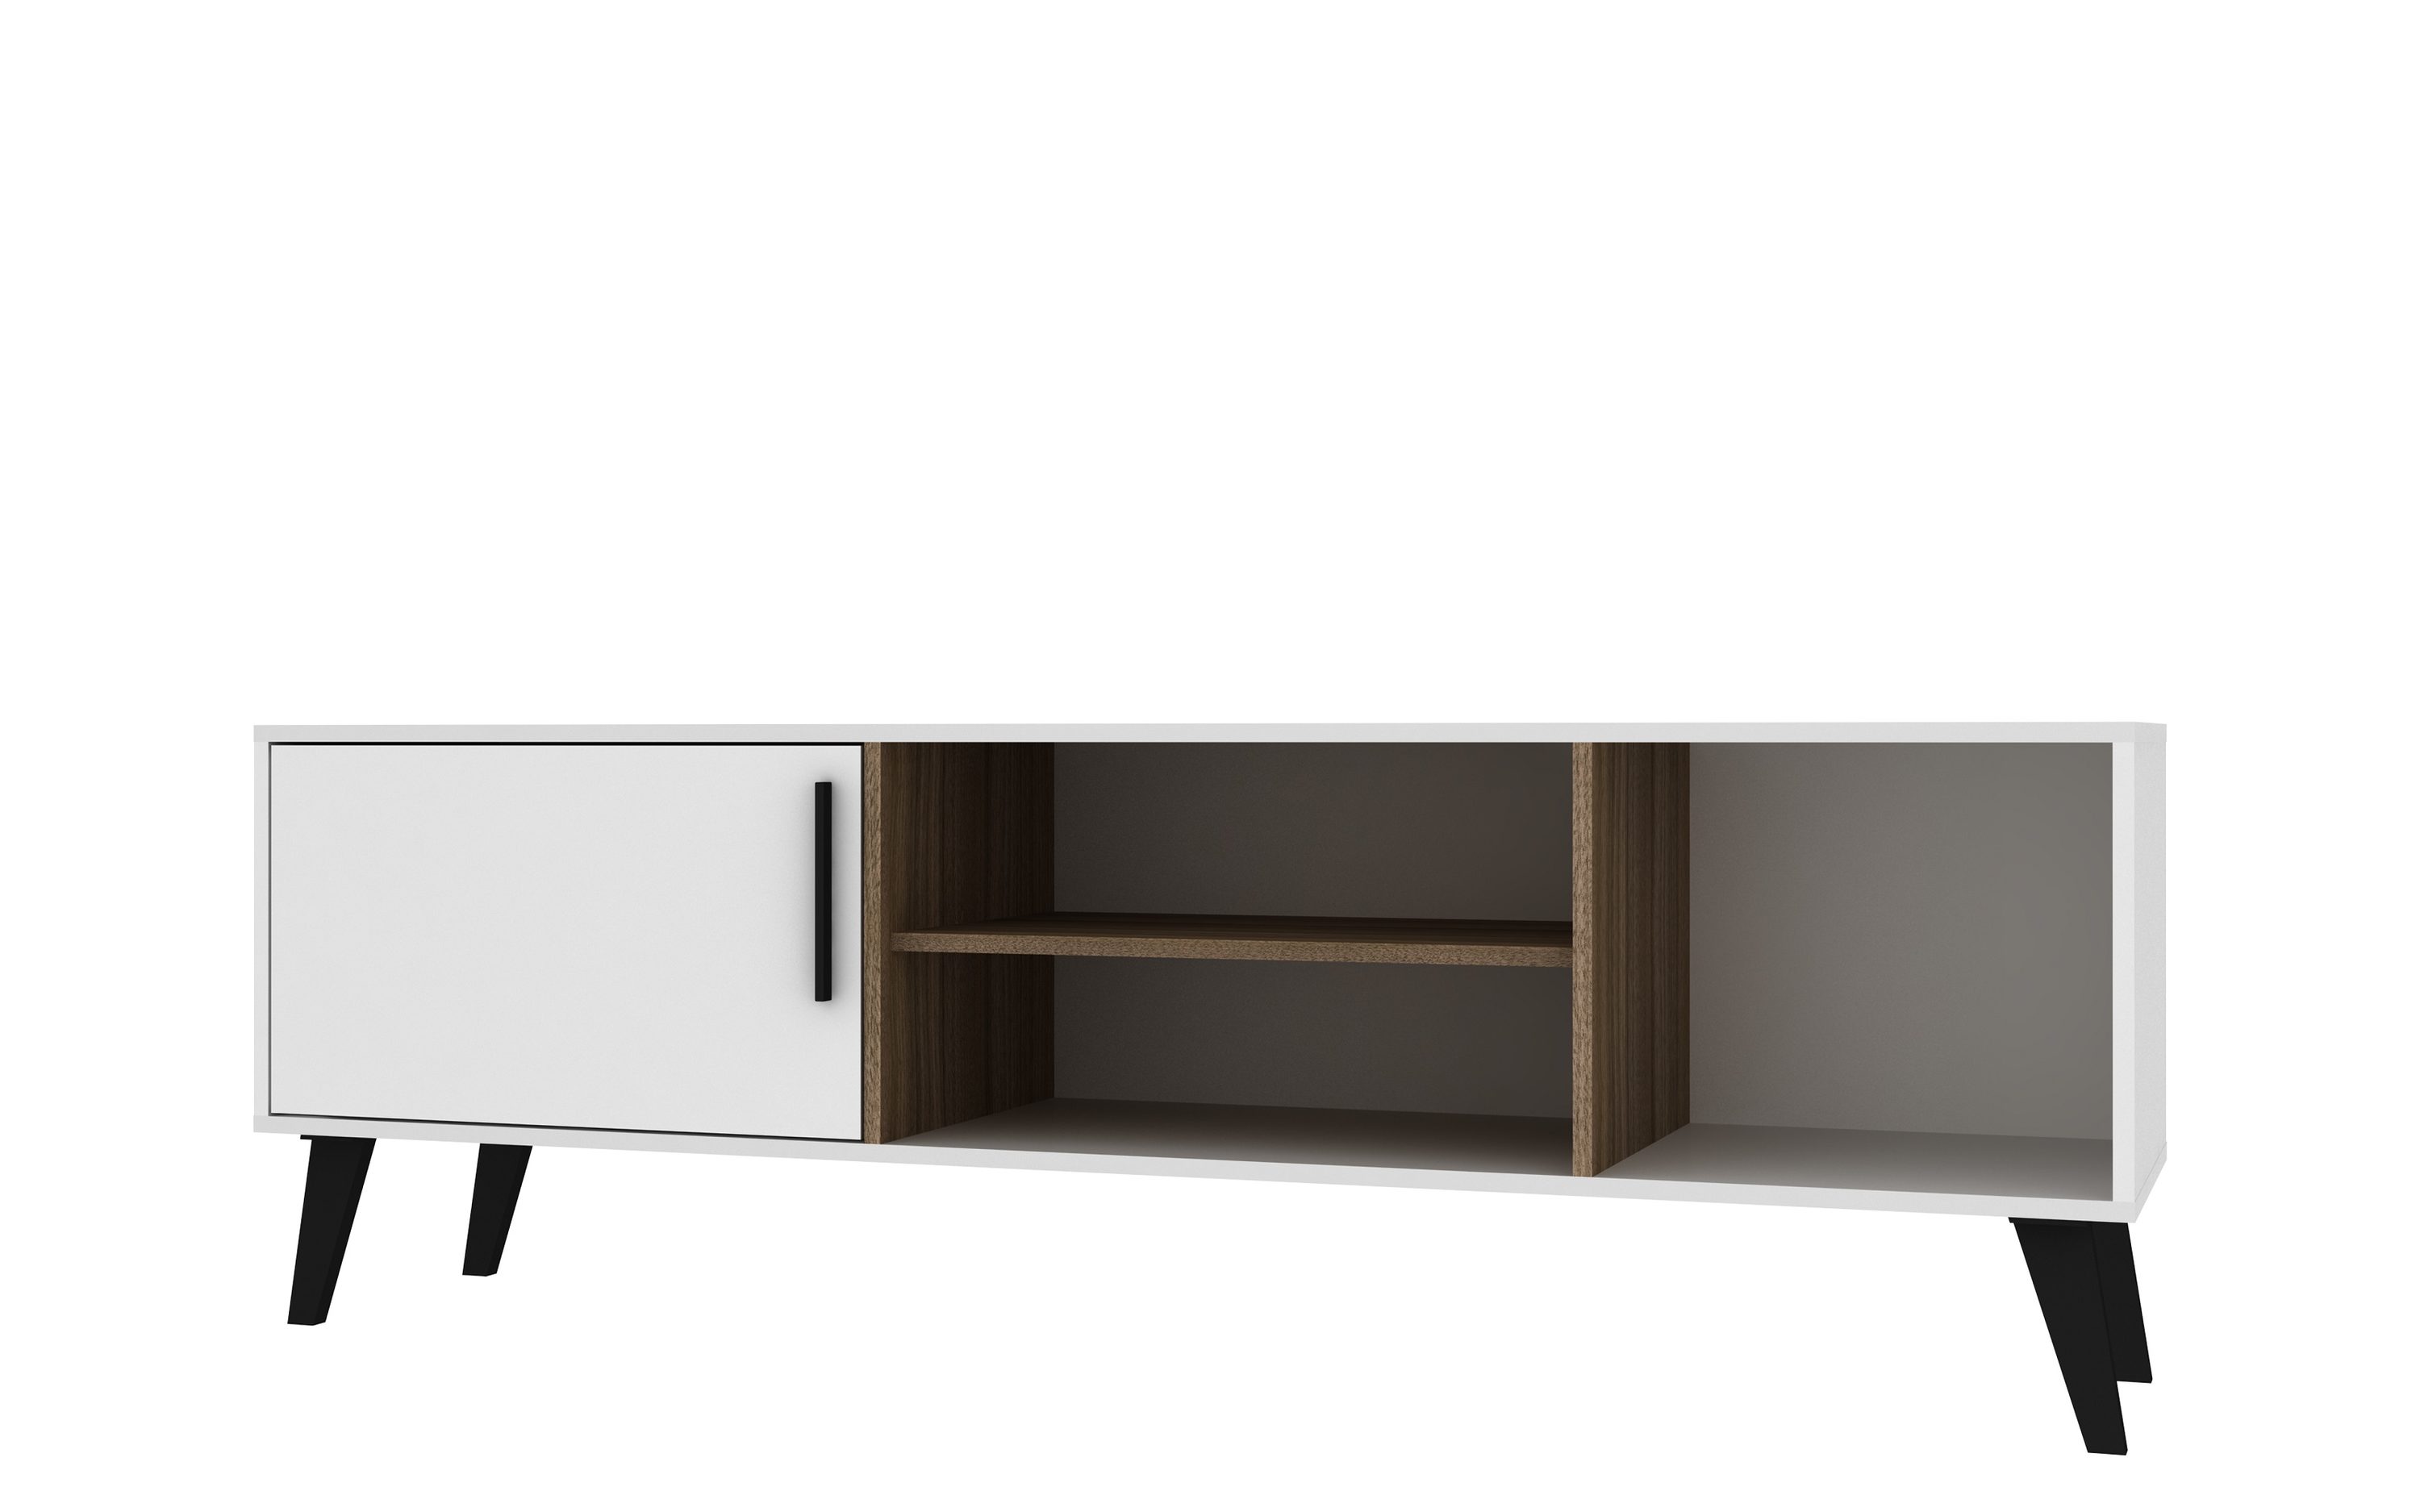 gesprek versieren Bang om te sterven Manhattan Comfort Amsterdam Modern/Contemporary White and Oak TV Stand  (Accommodates TVs up to 40-in) in the TV Stands department at Lowes.com